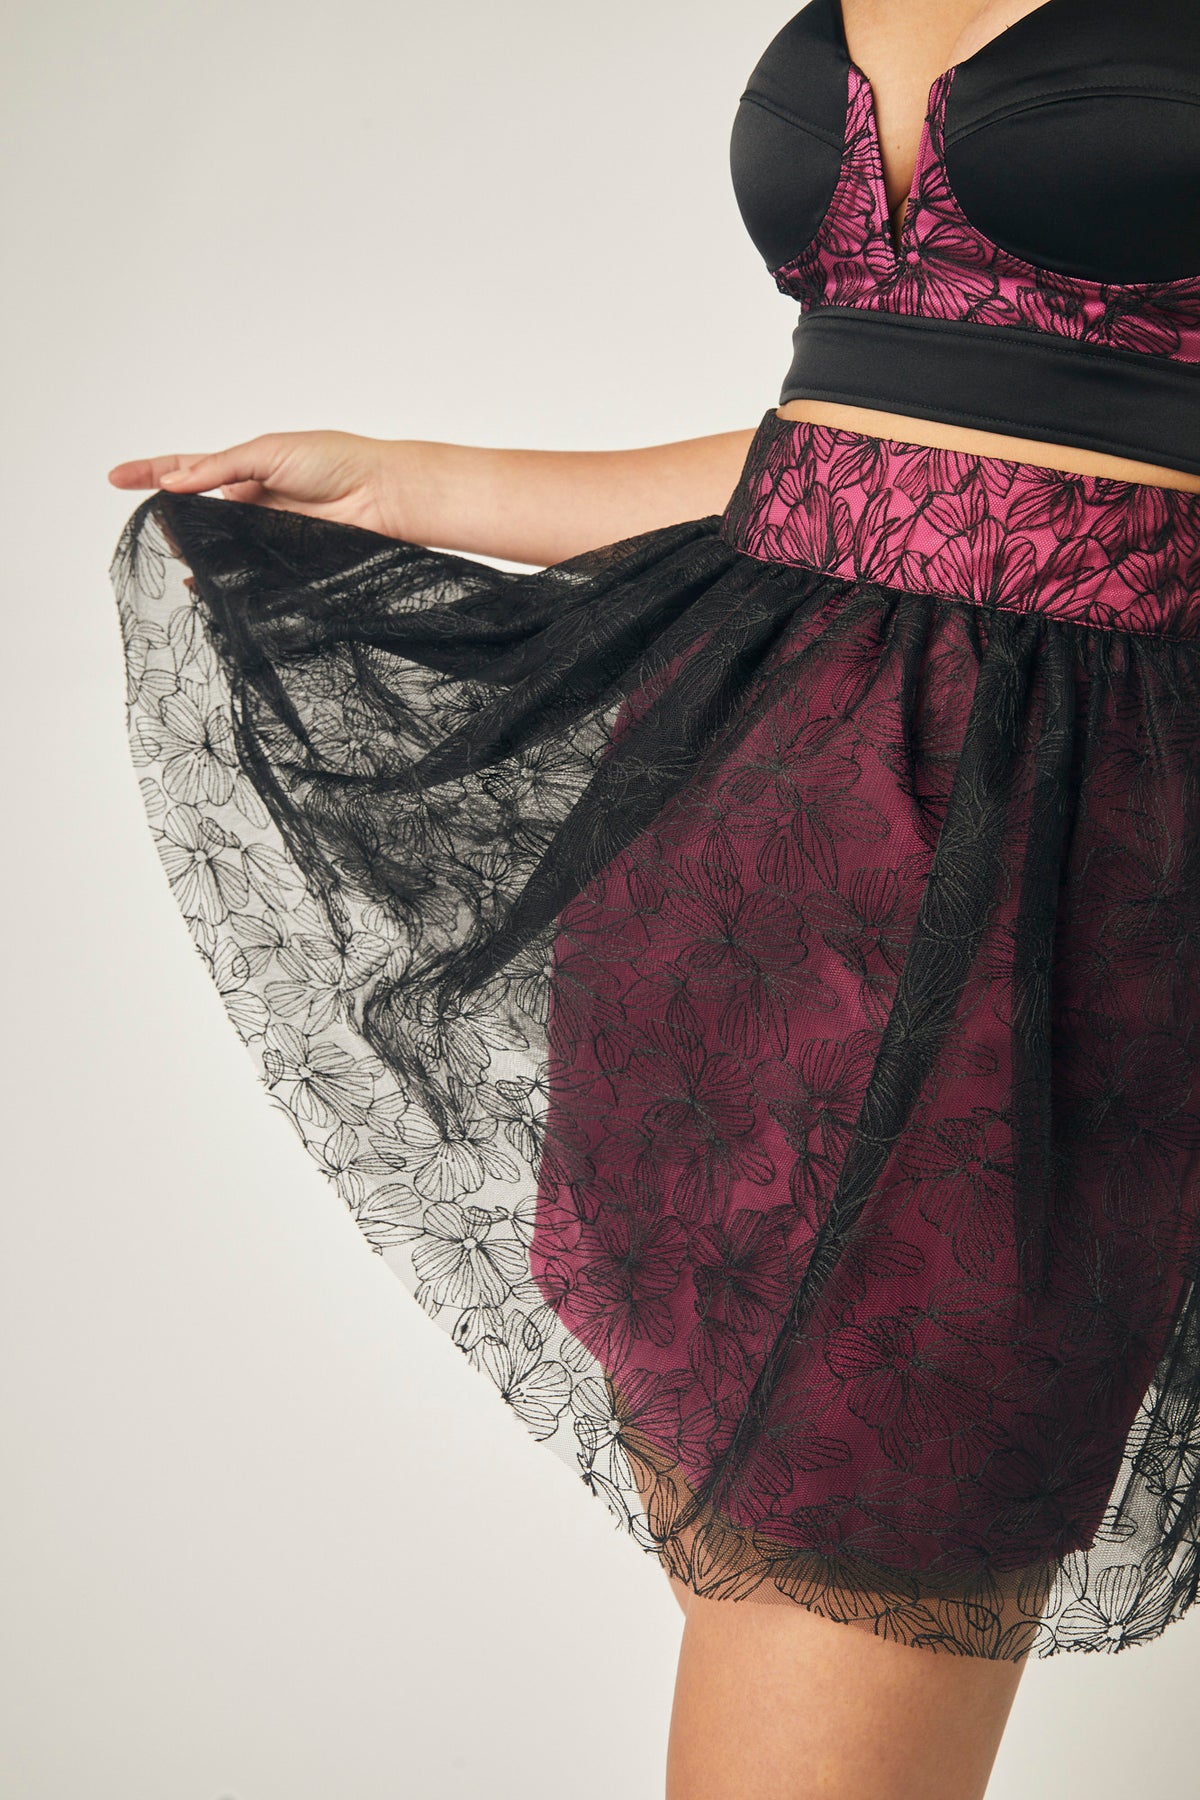 Raquel Embroidered Mesh Skirt In Raspberry Rose